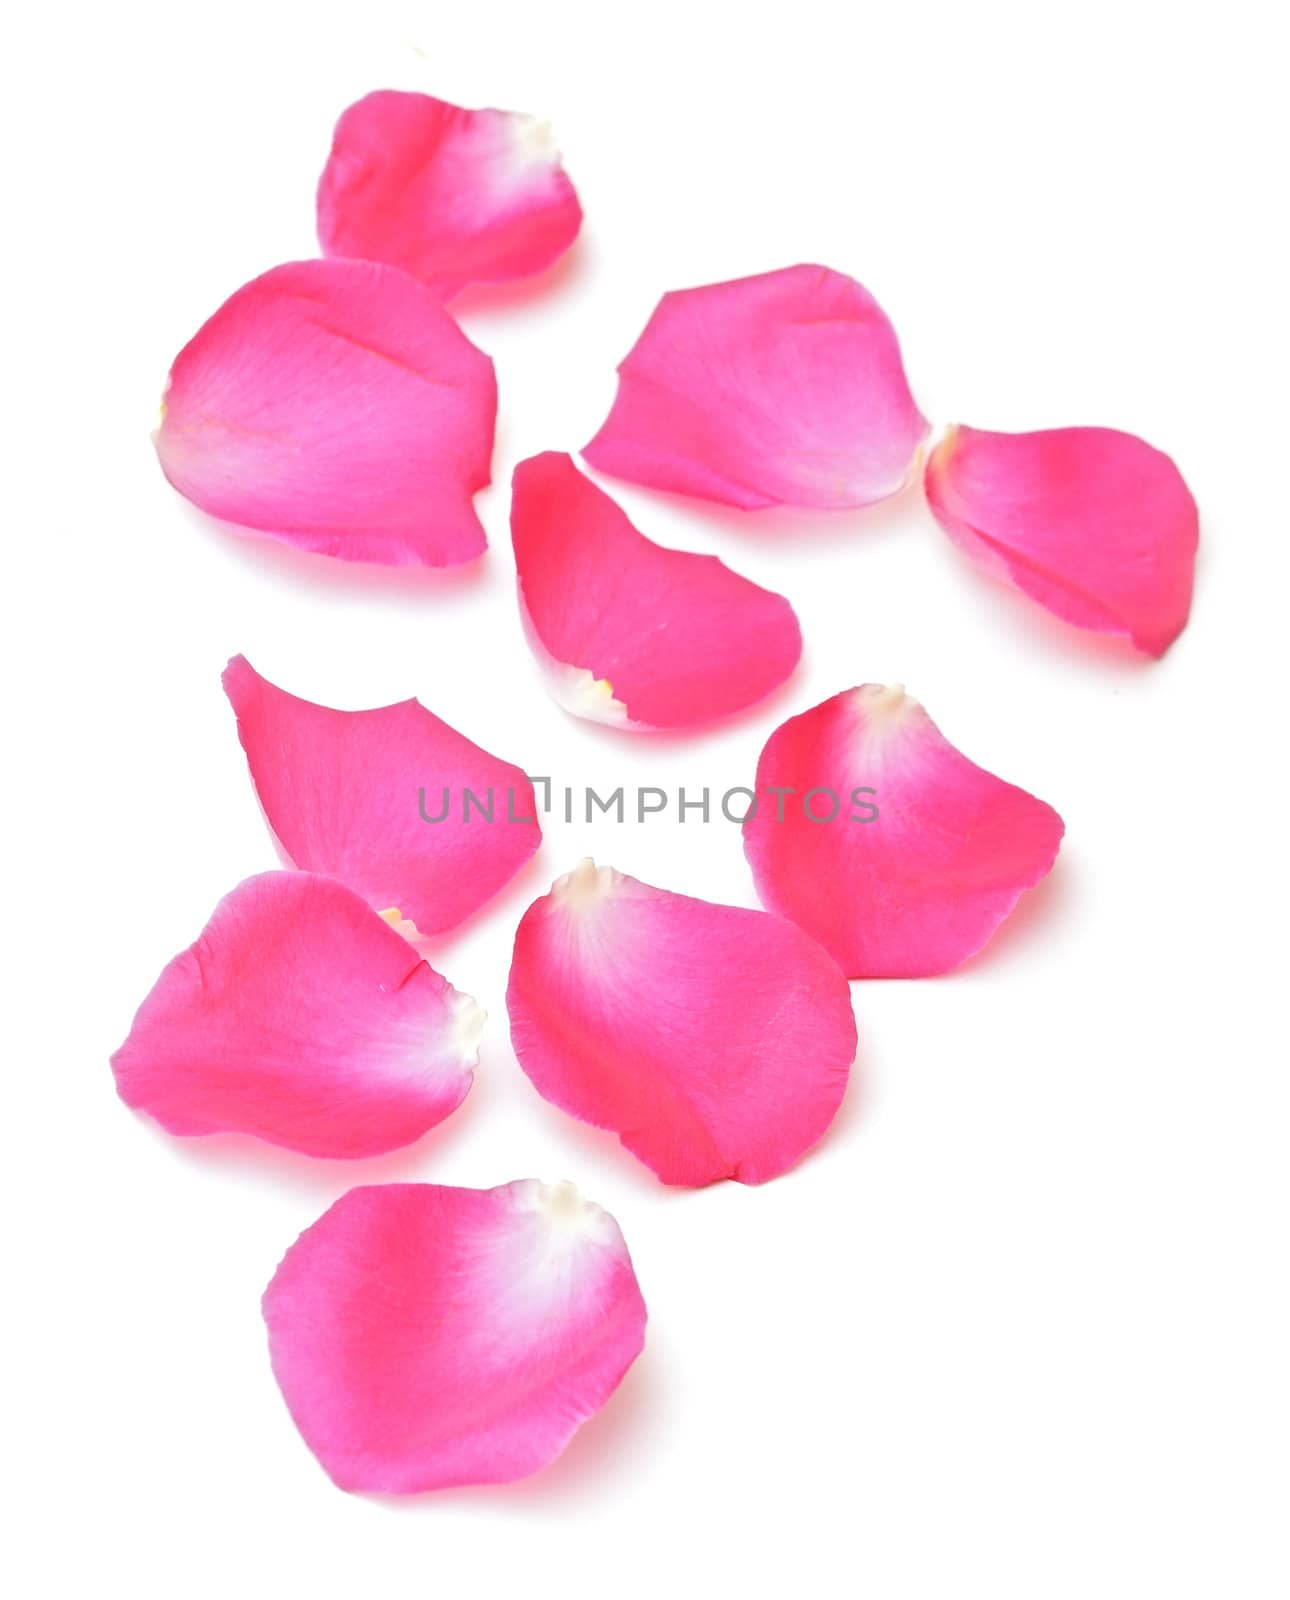 Abstract background of pink rose petals